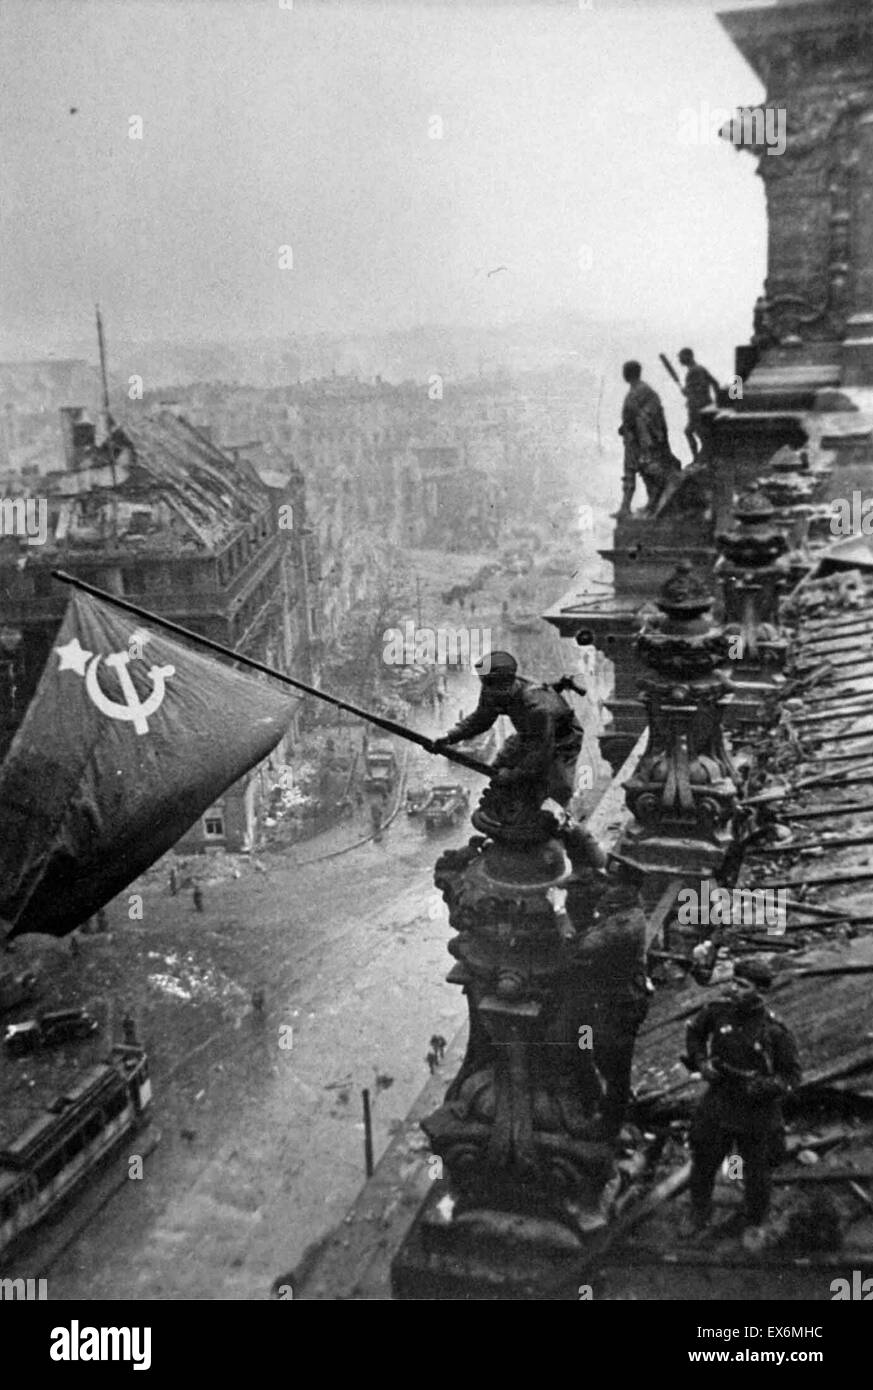 Russian flag is flown over the ruins of the Reichstag, in Berlin at the end of world war two. (photo by Yevgeny Khaldei, 1945) Stock Photo